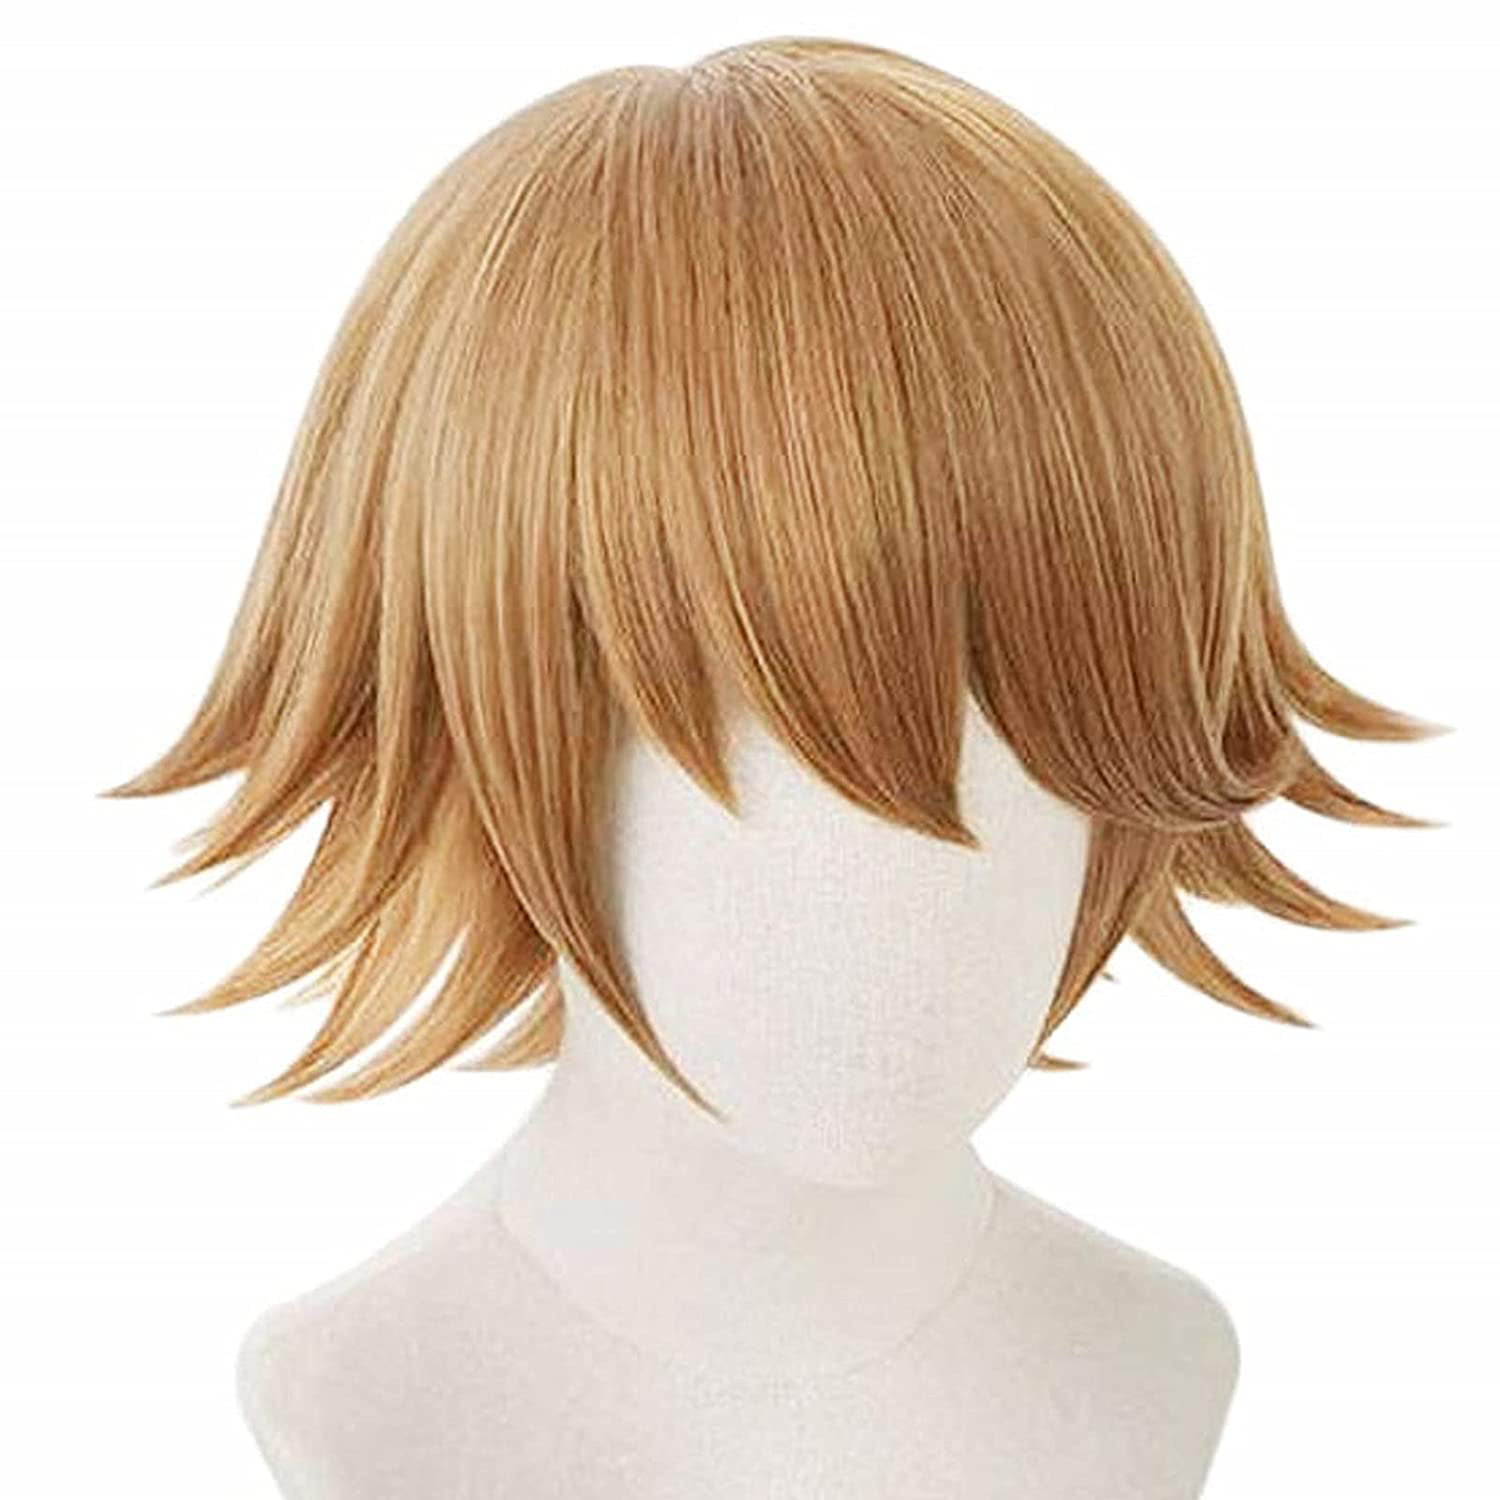 ANOGOL Hair Cap+Short Layered Light Green Cosplay Wig Short Wave Costume for Party 